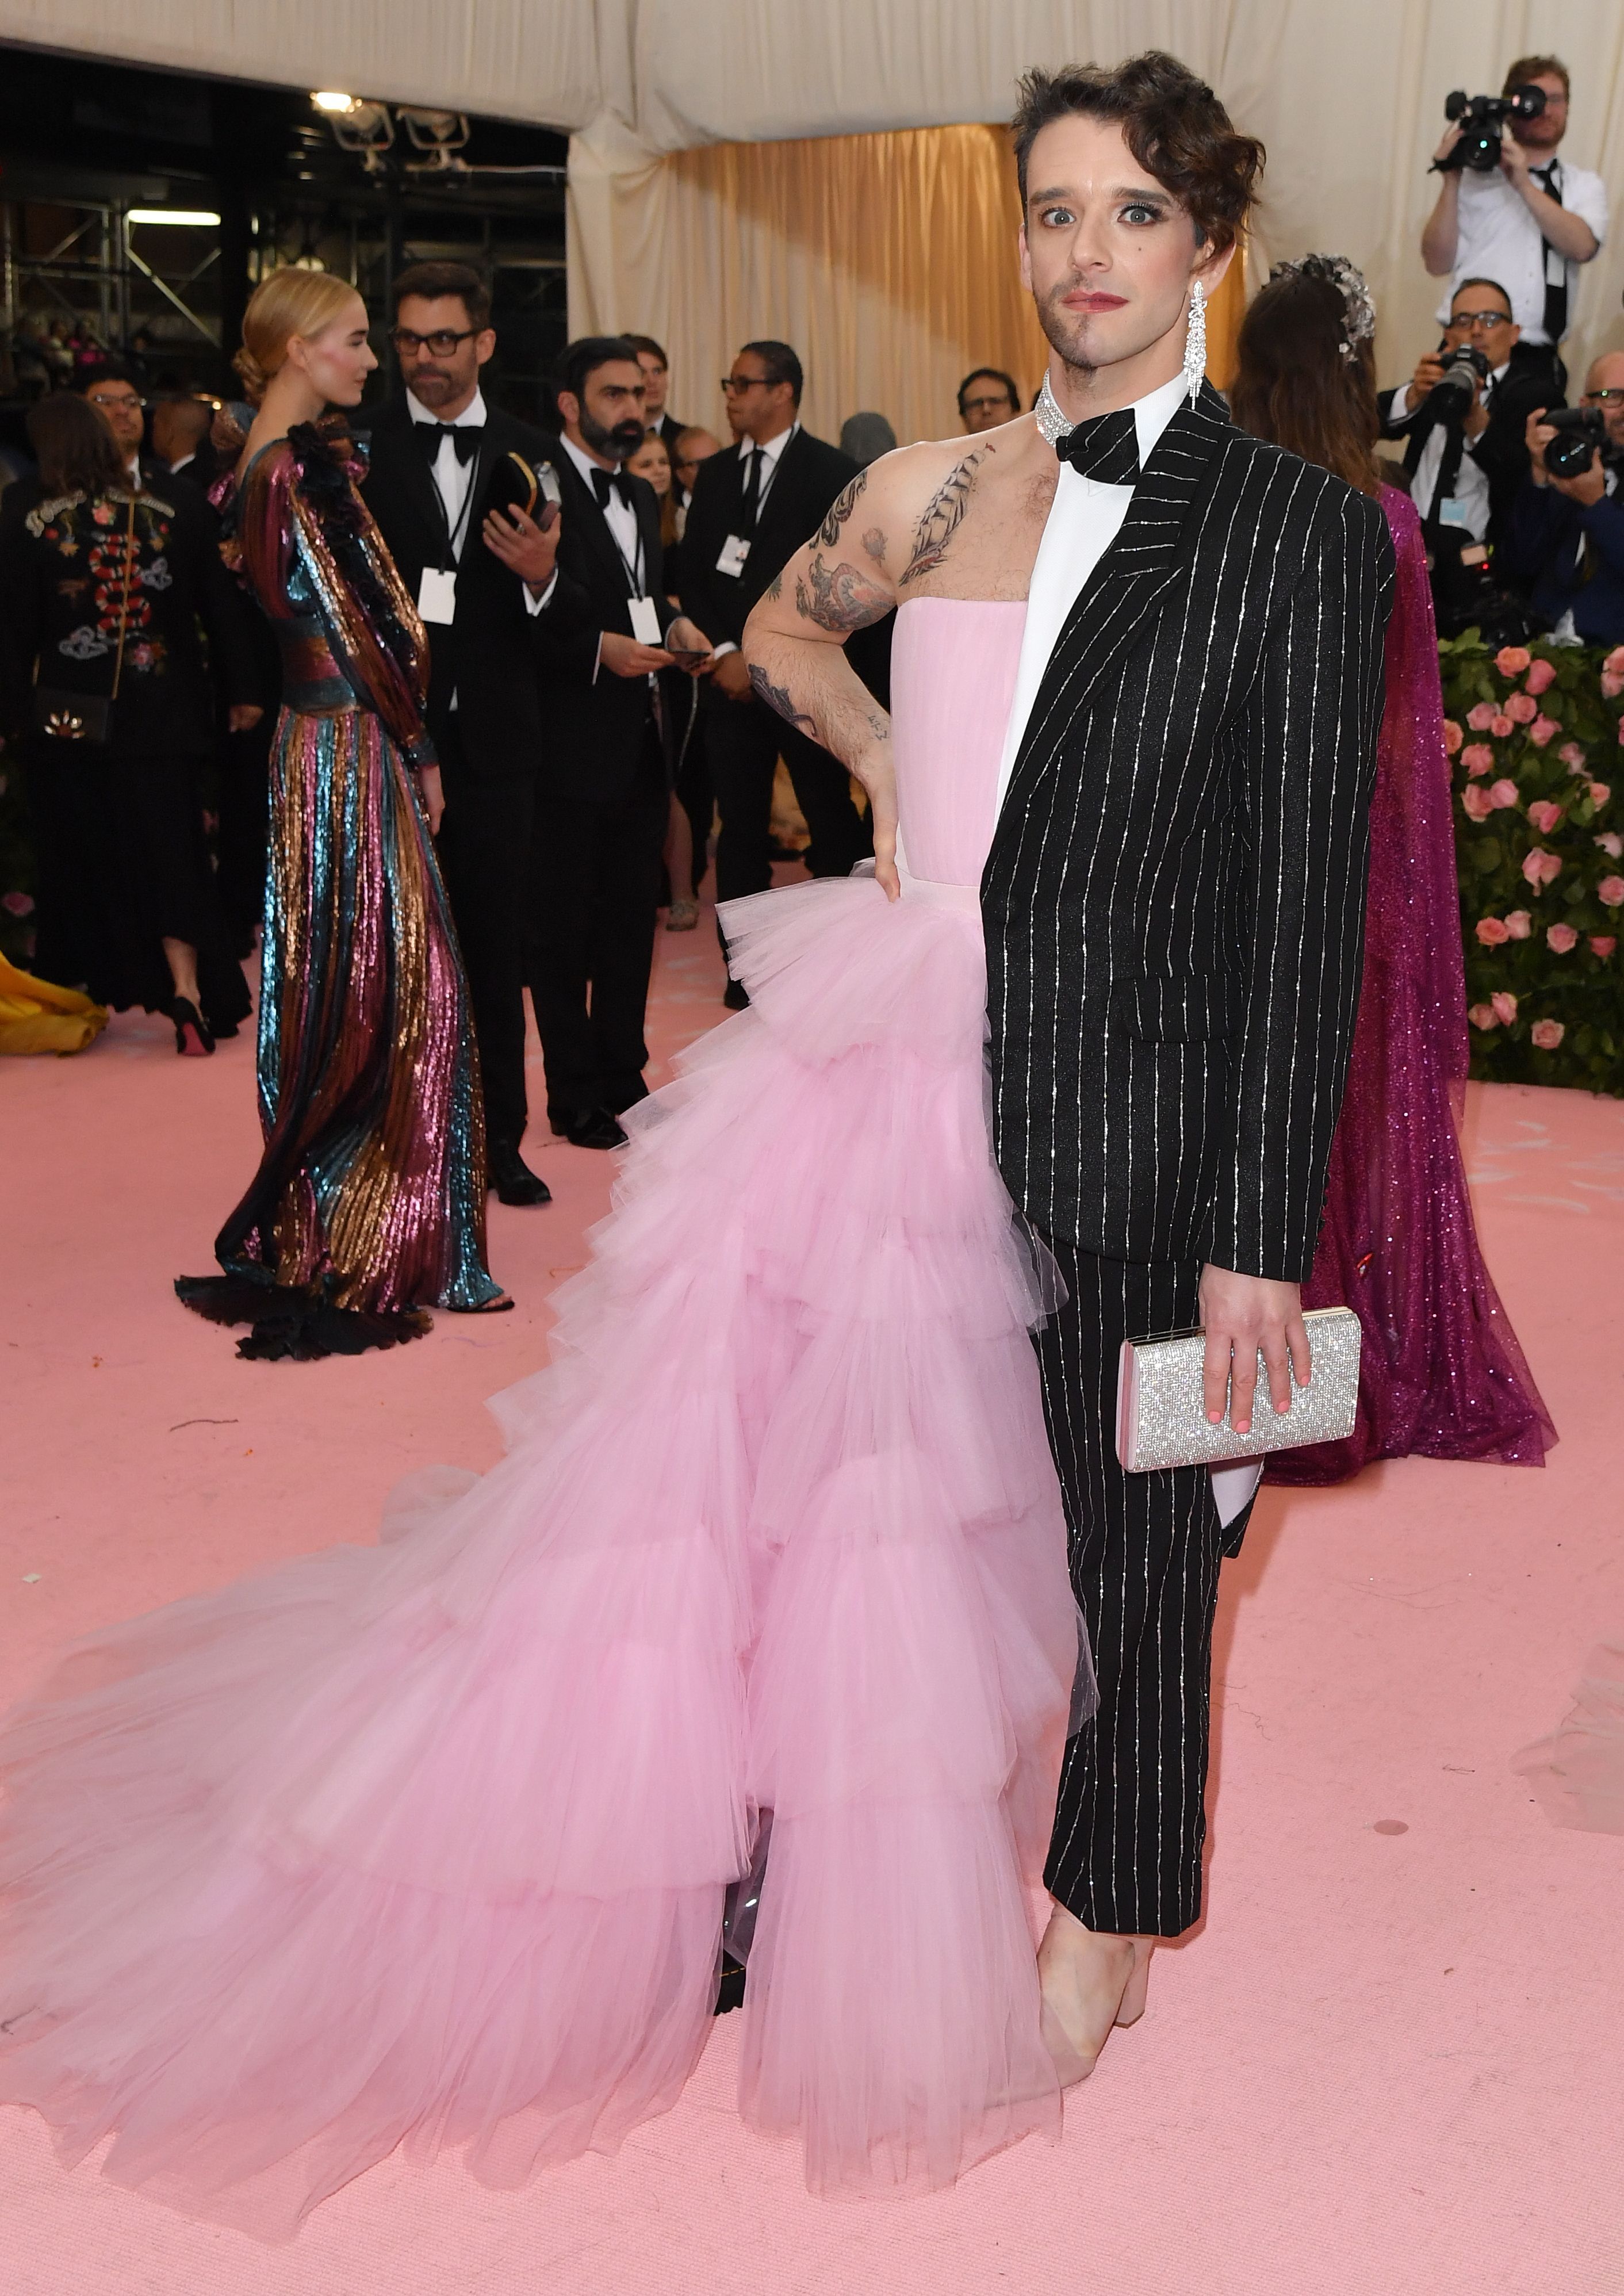 Met Gala best and worst red carpet looks: All the fashion hits and